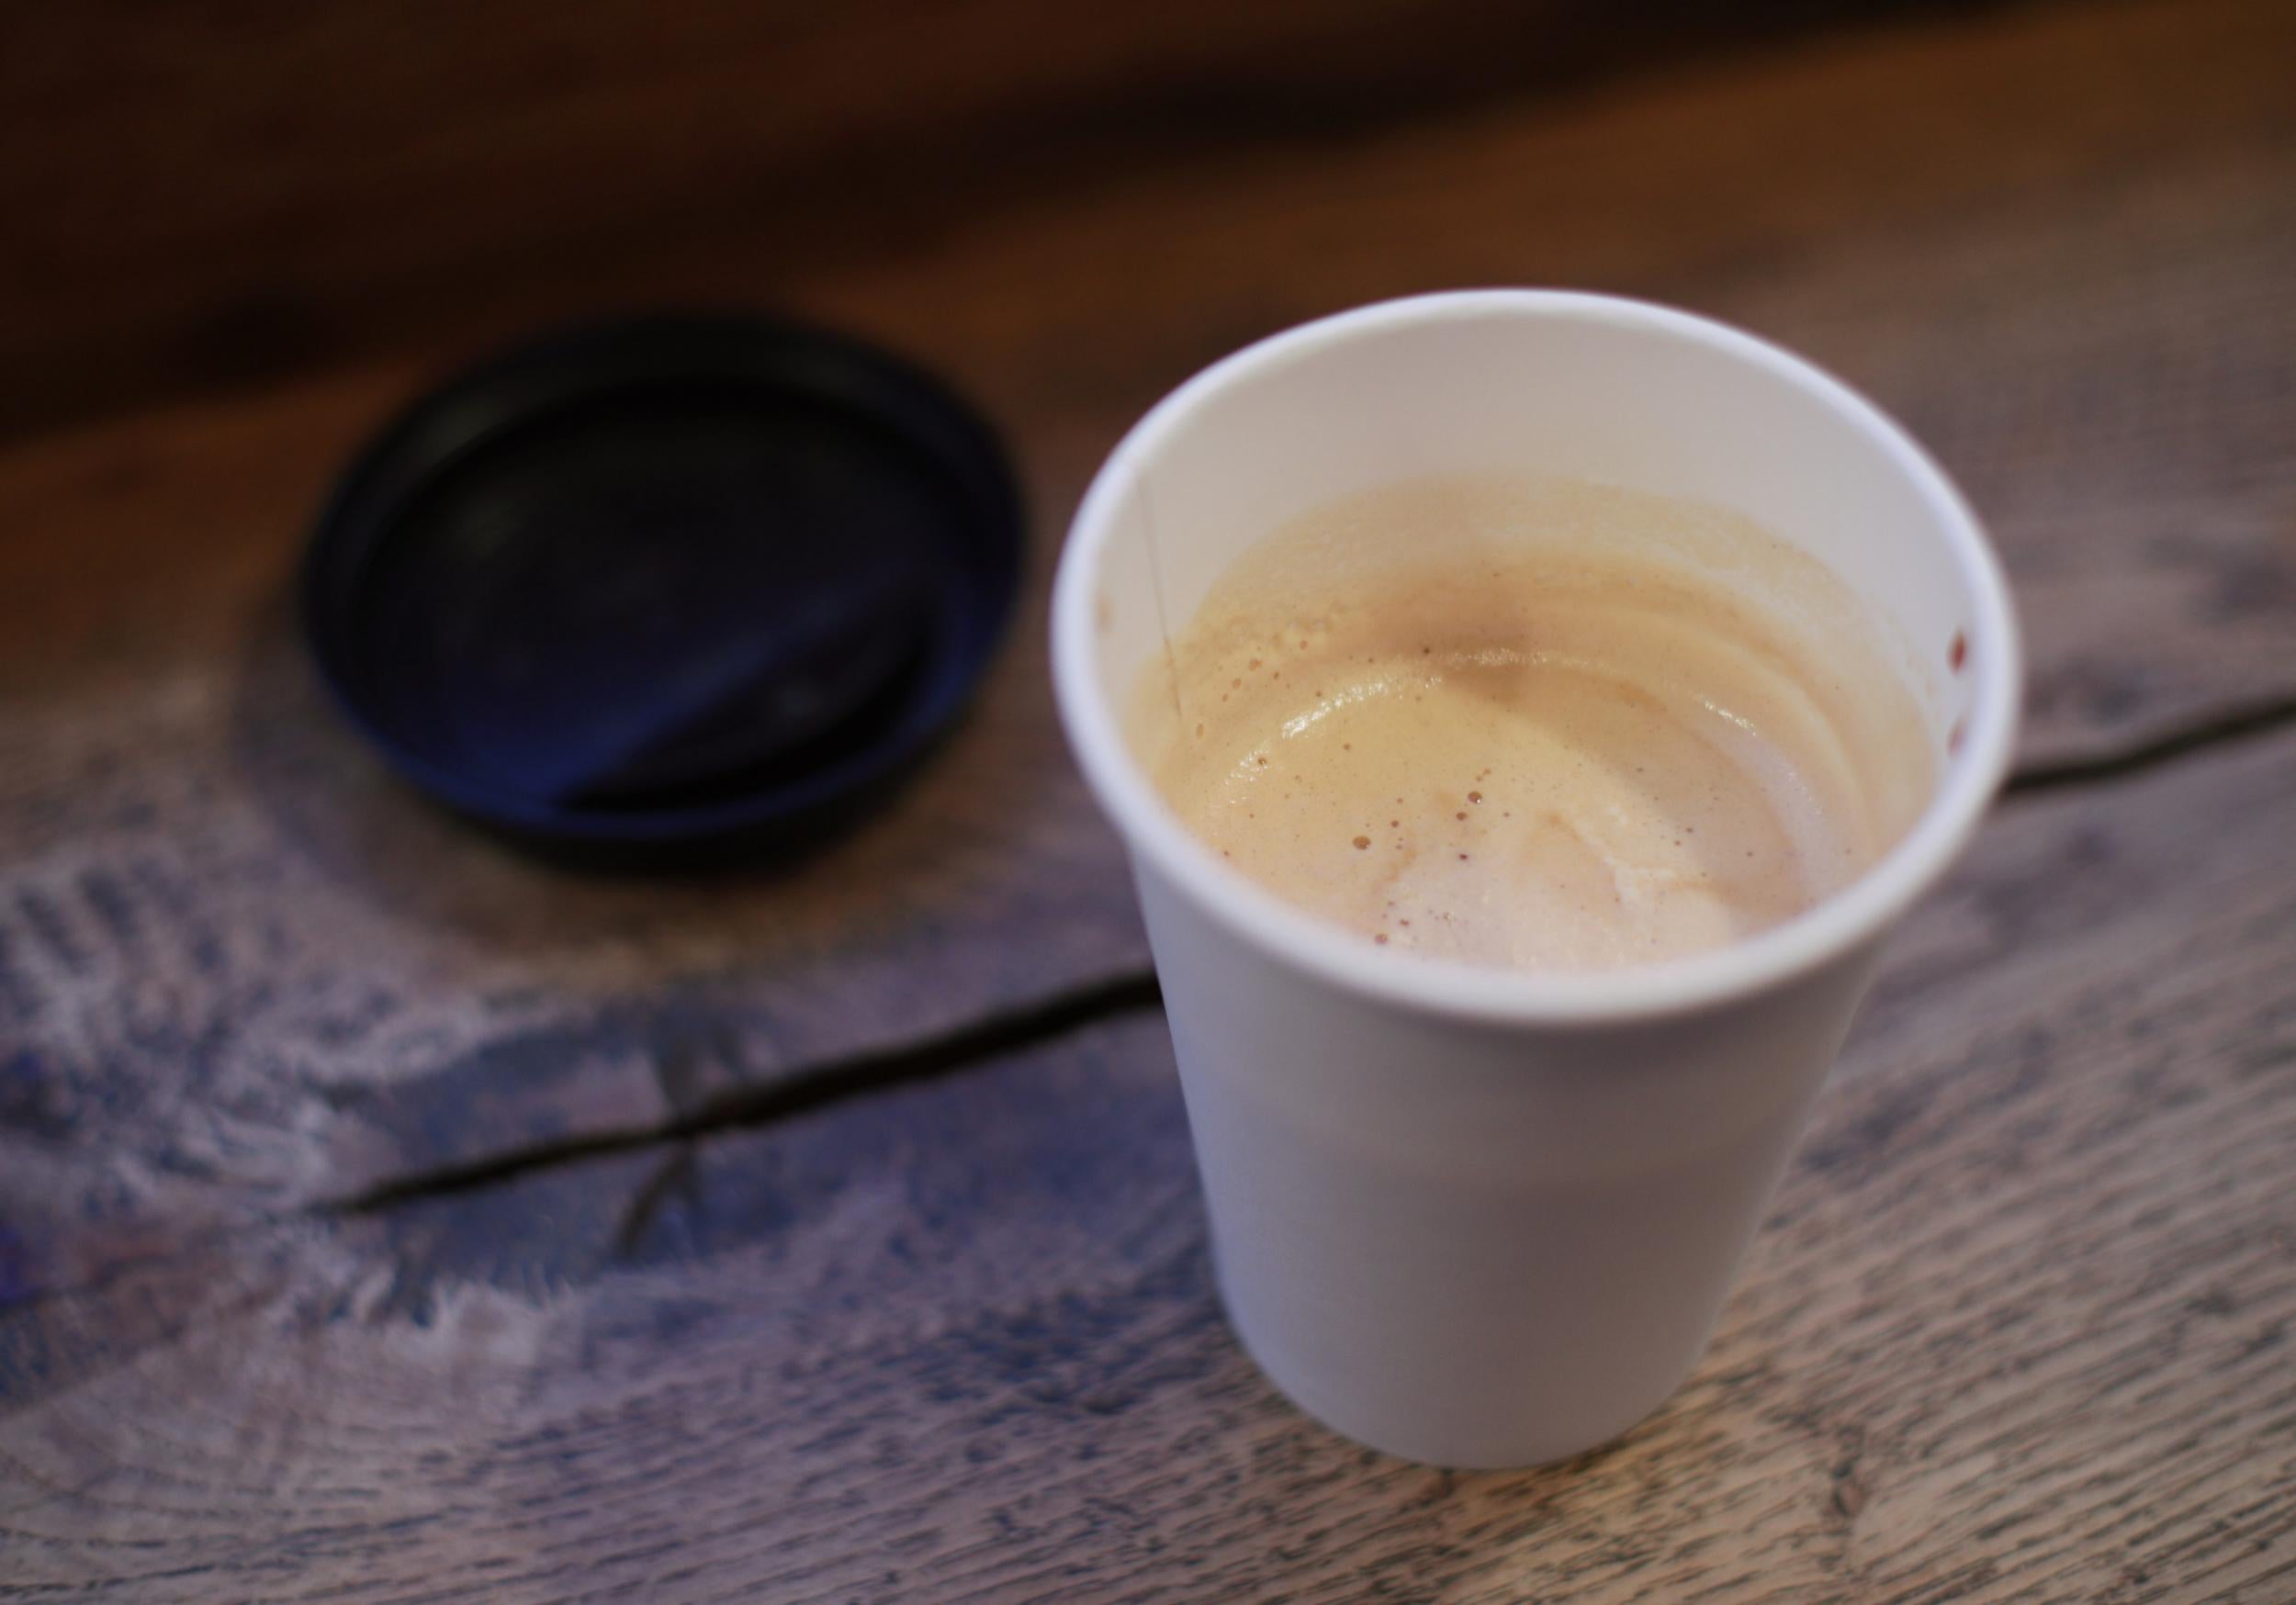 Latte Levy on disposable plastic lined coffee cups looks doomed for now